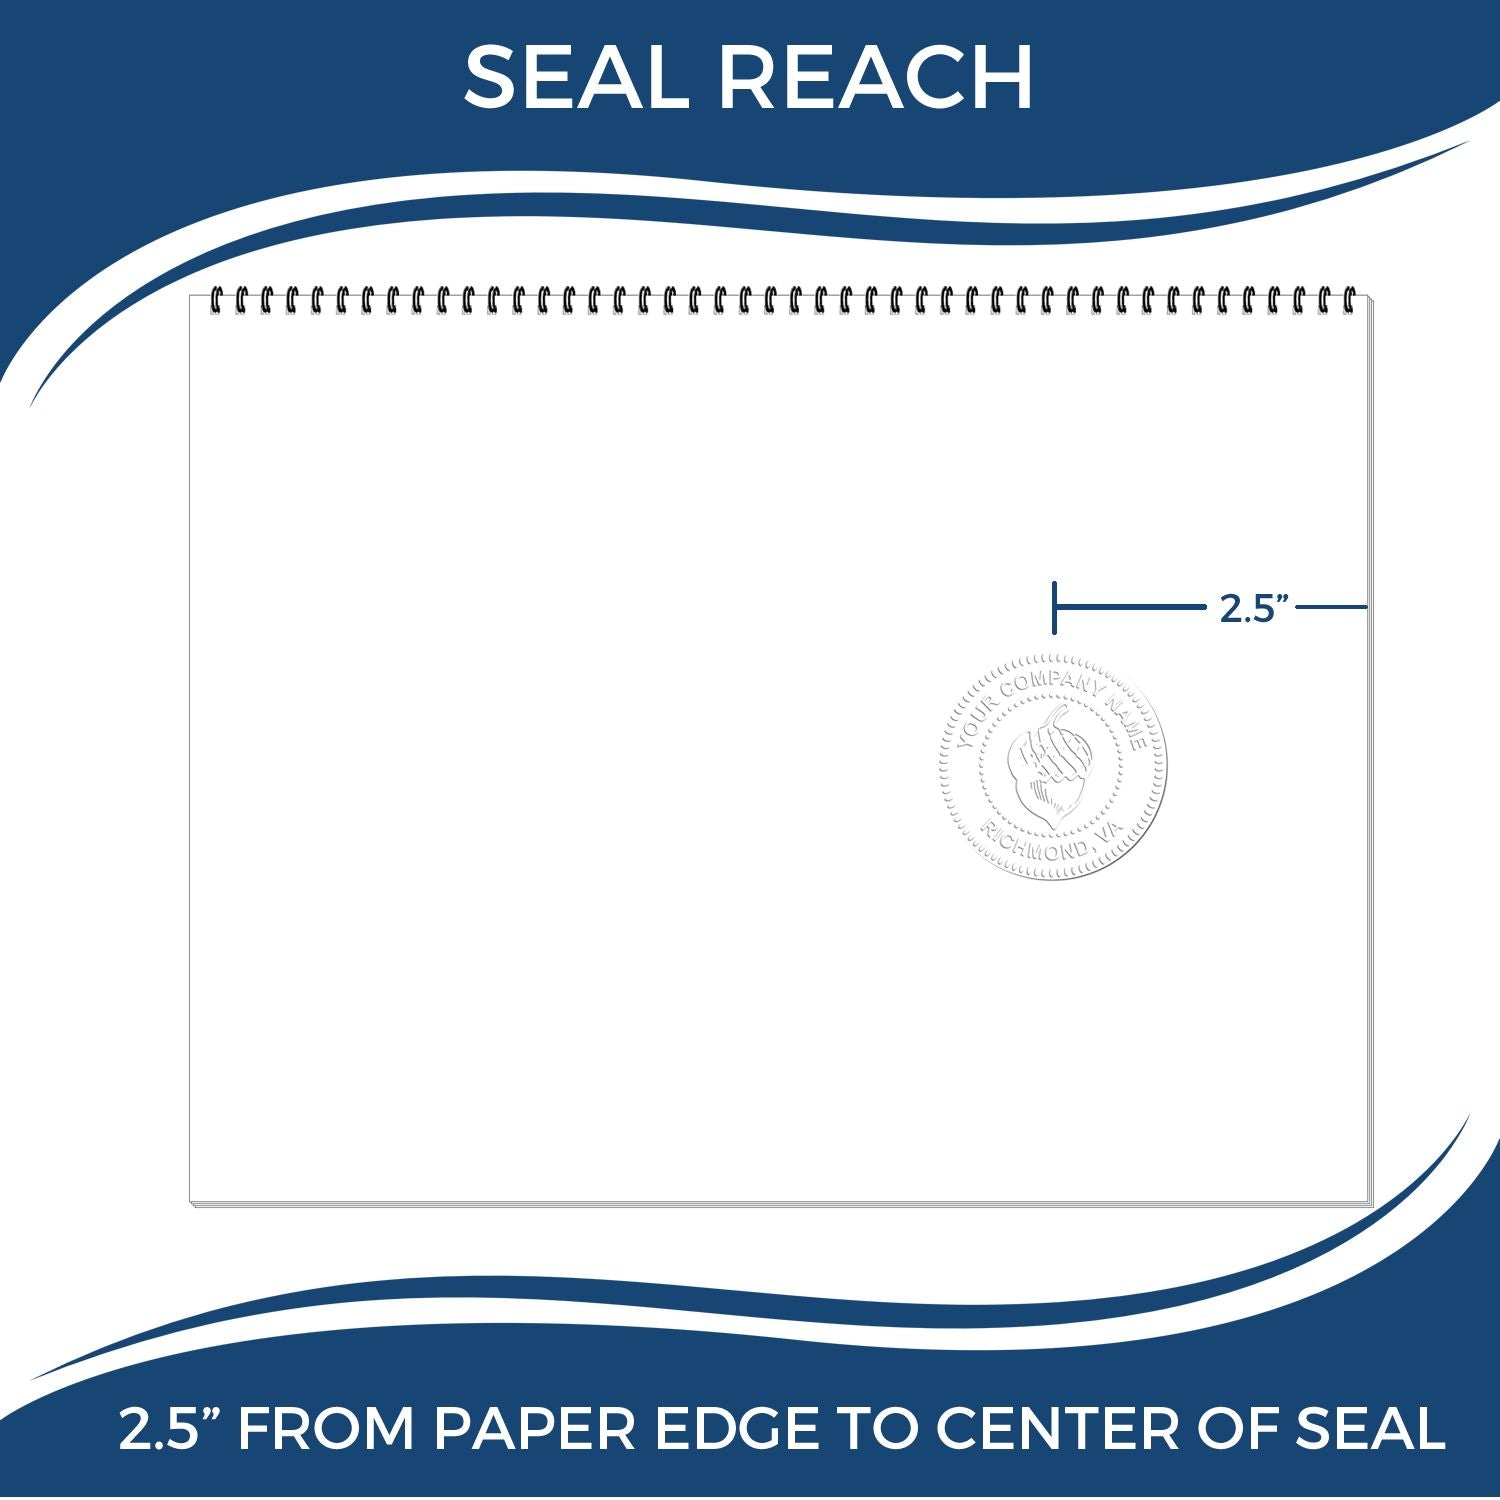 An infographic showing the seal reach which is represented by a ruler and a miniature seal image of the Heavy Duty Cast Iron North Dakota Land Surveyor Seal Embosser